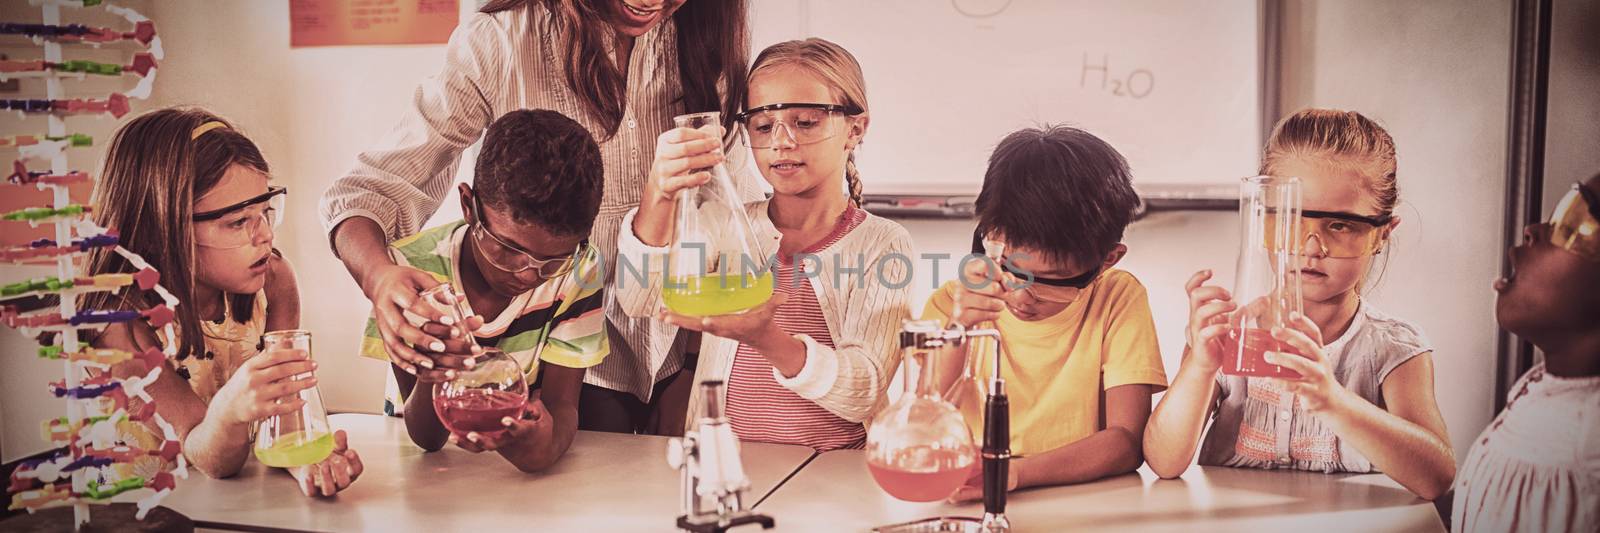 Pupils learning science with teacher in classroom